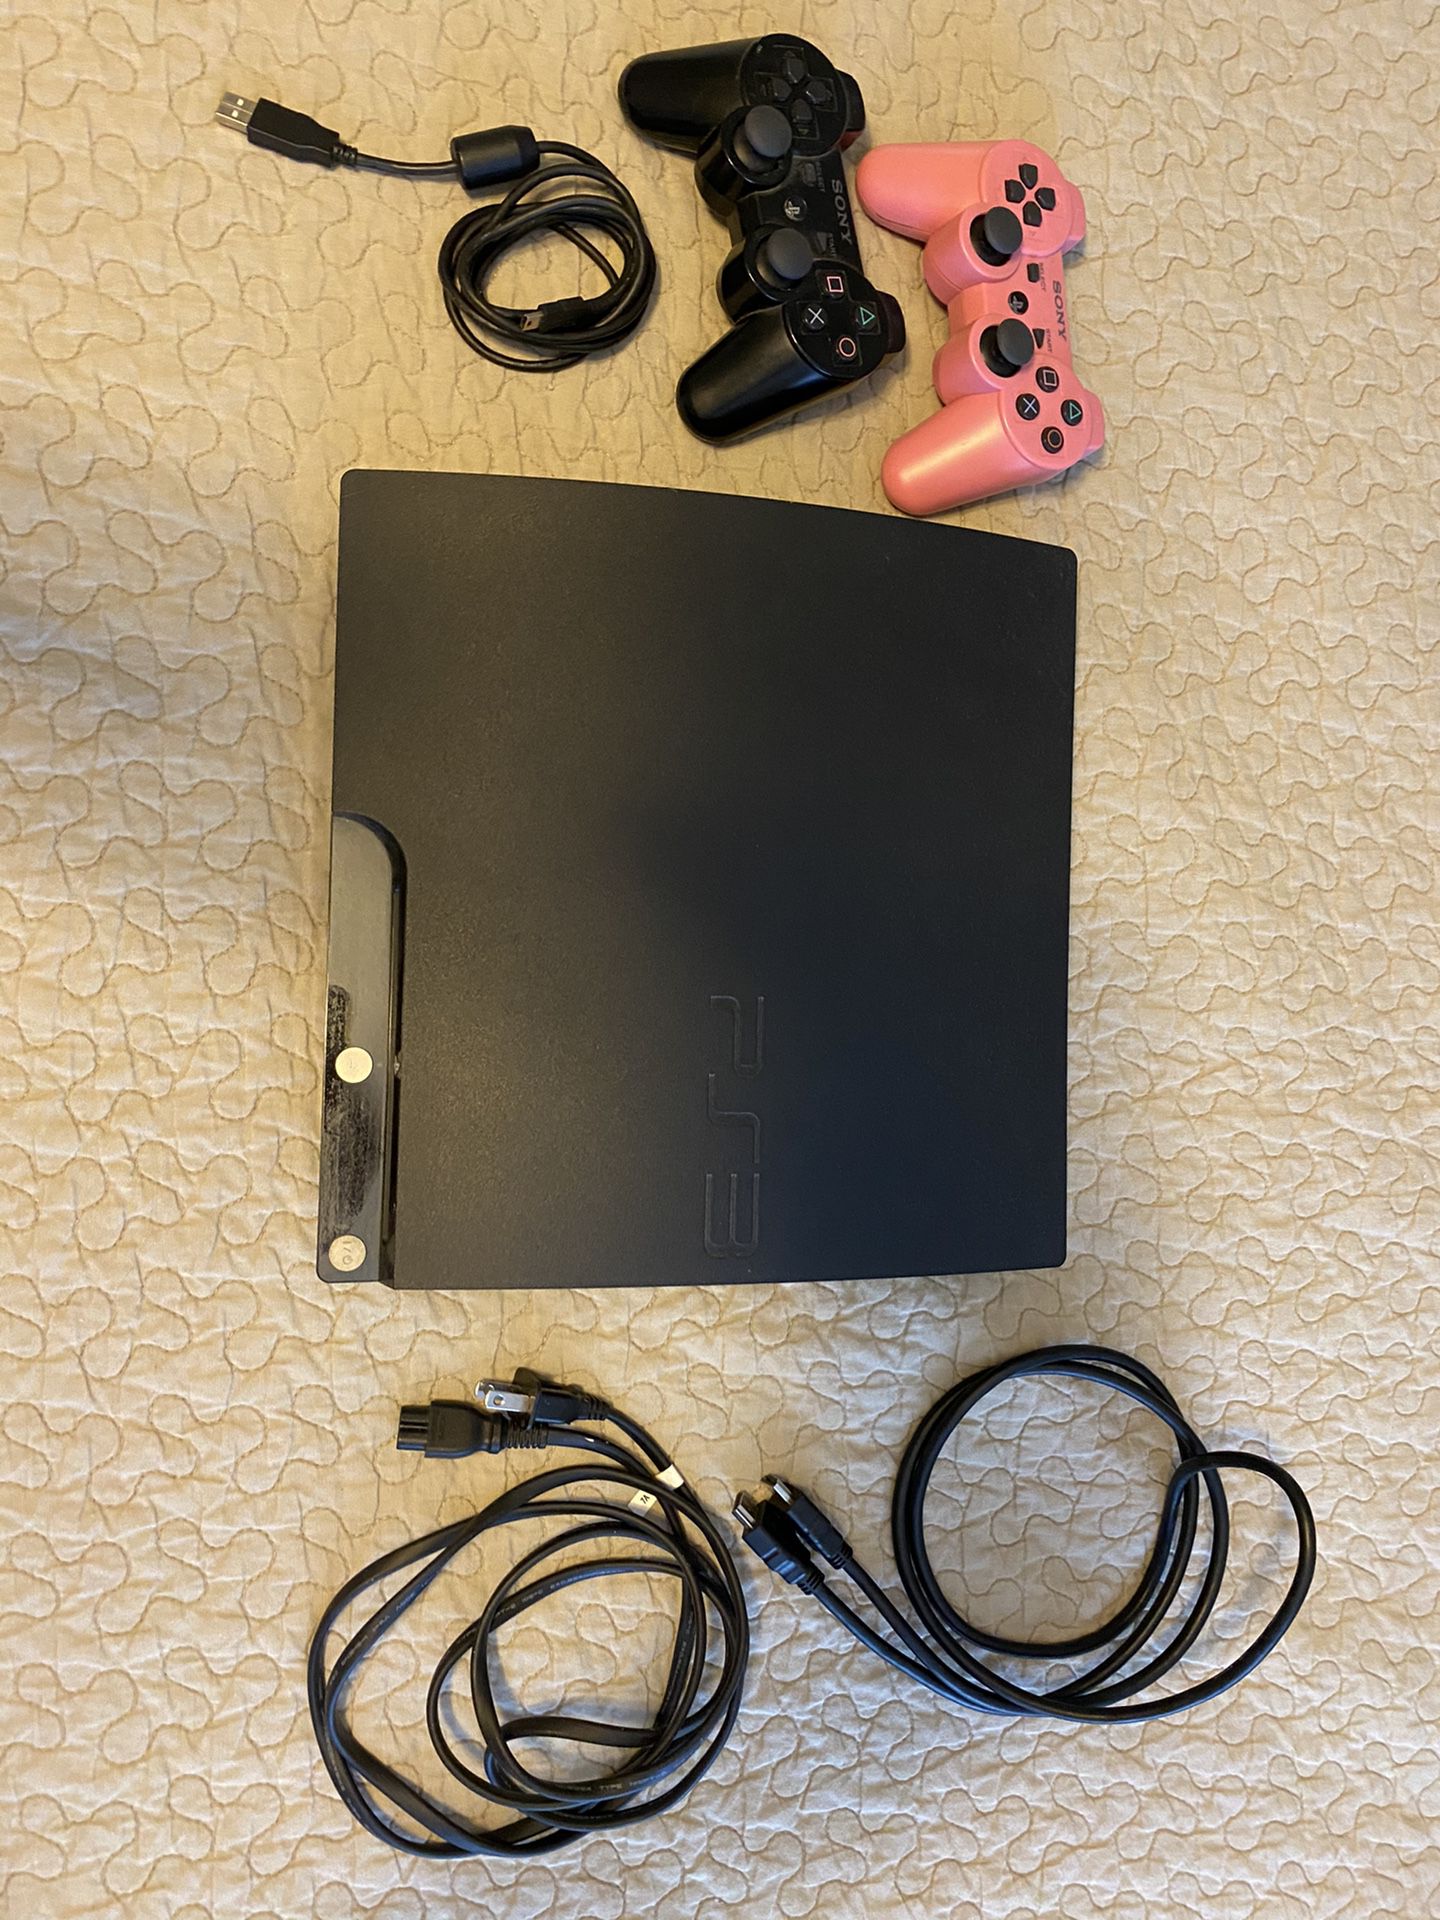 PS3 with 2 controllers